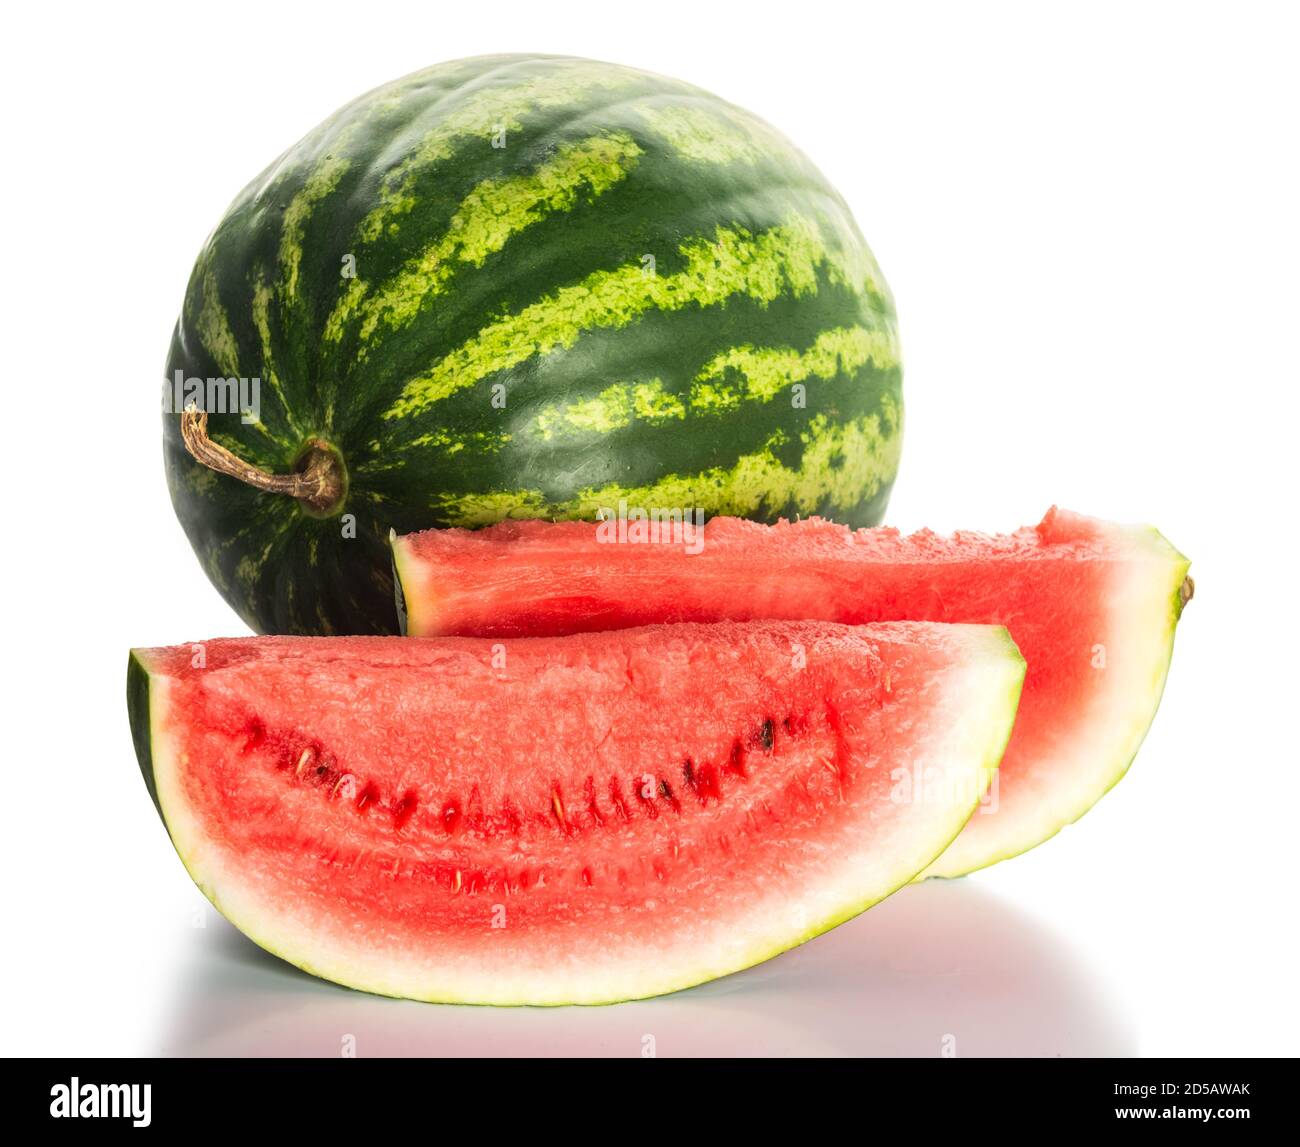 Fresh watermelon and slices of watermelon isolated on white background. Stock Photo